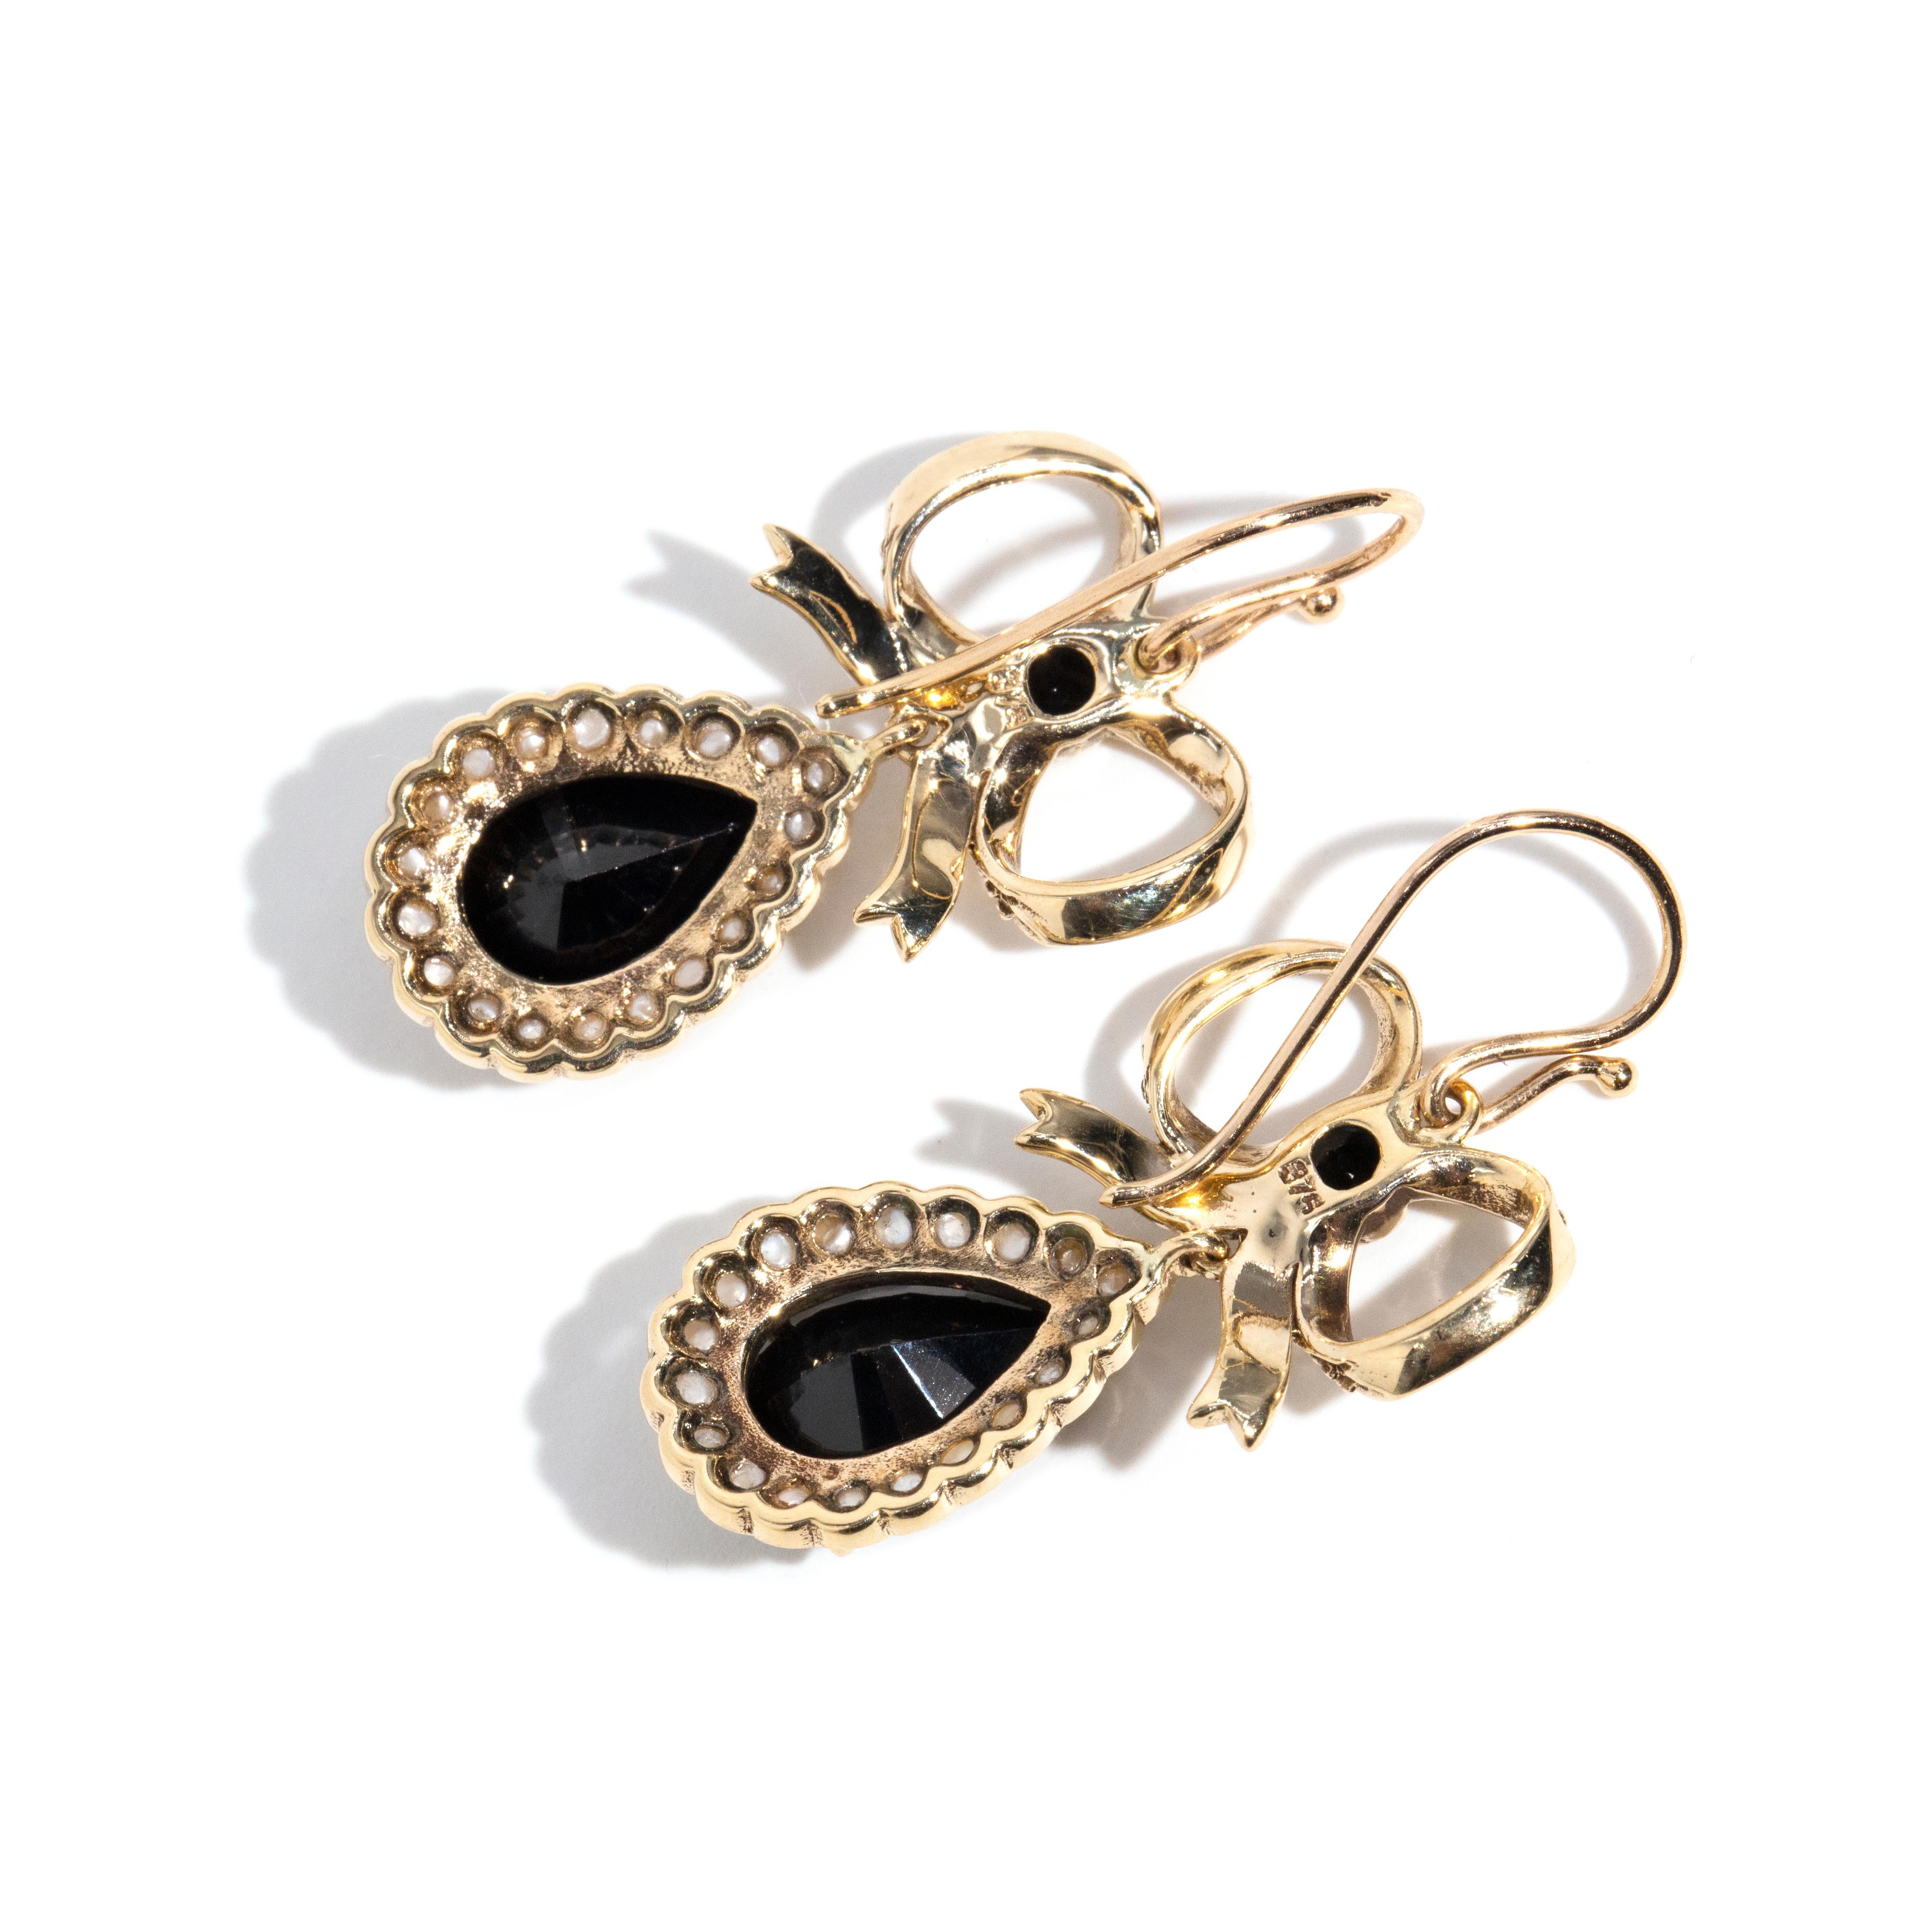 Vintage Inspired Black Onyx & Seed Pearl Bow Drop Earrings 9 Carat Yellow Gold 1